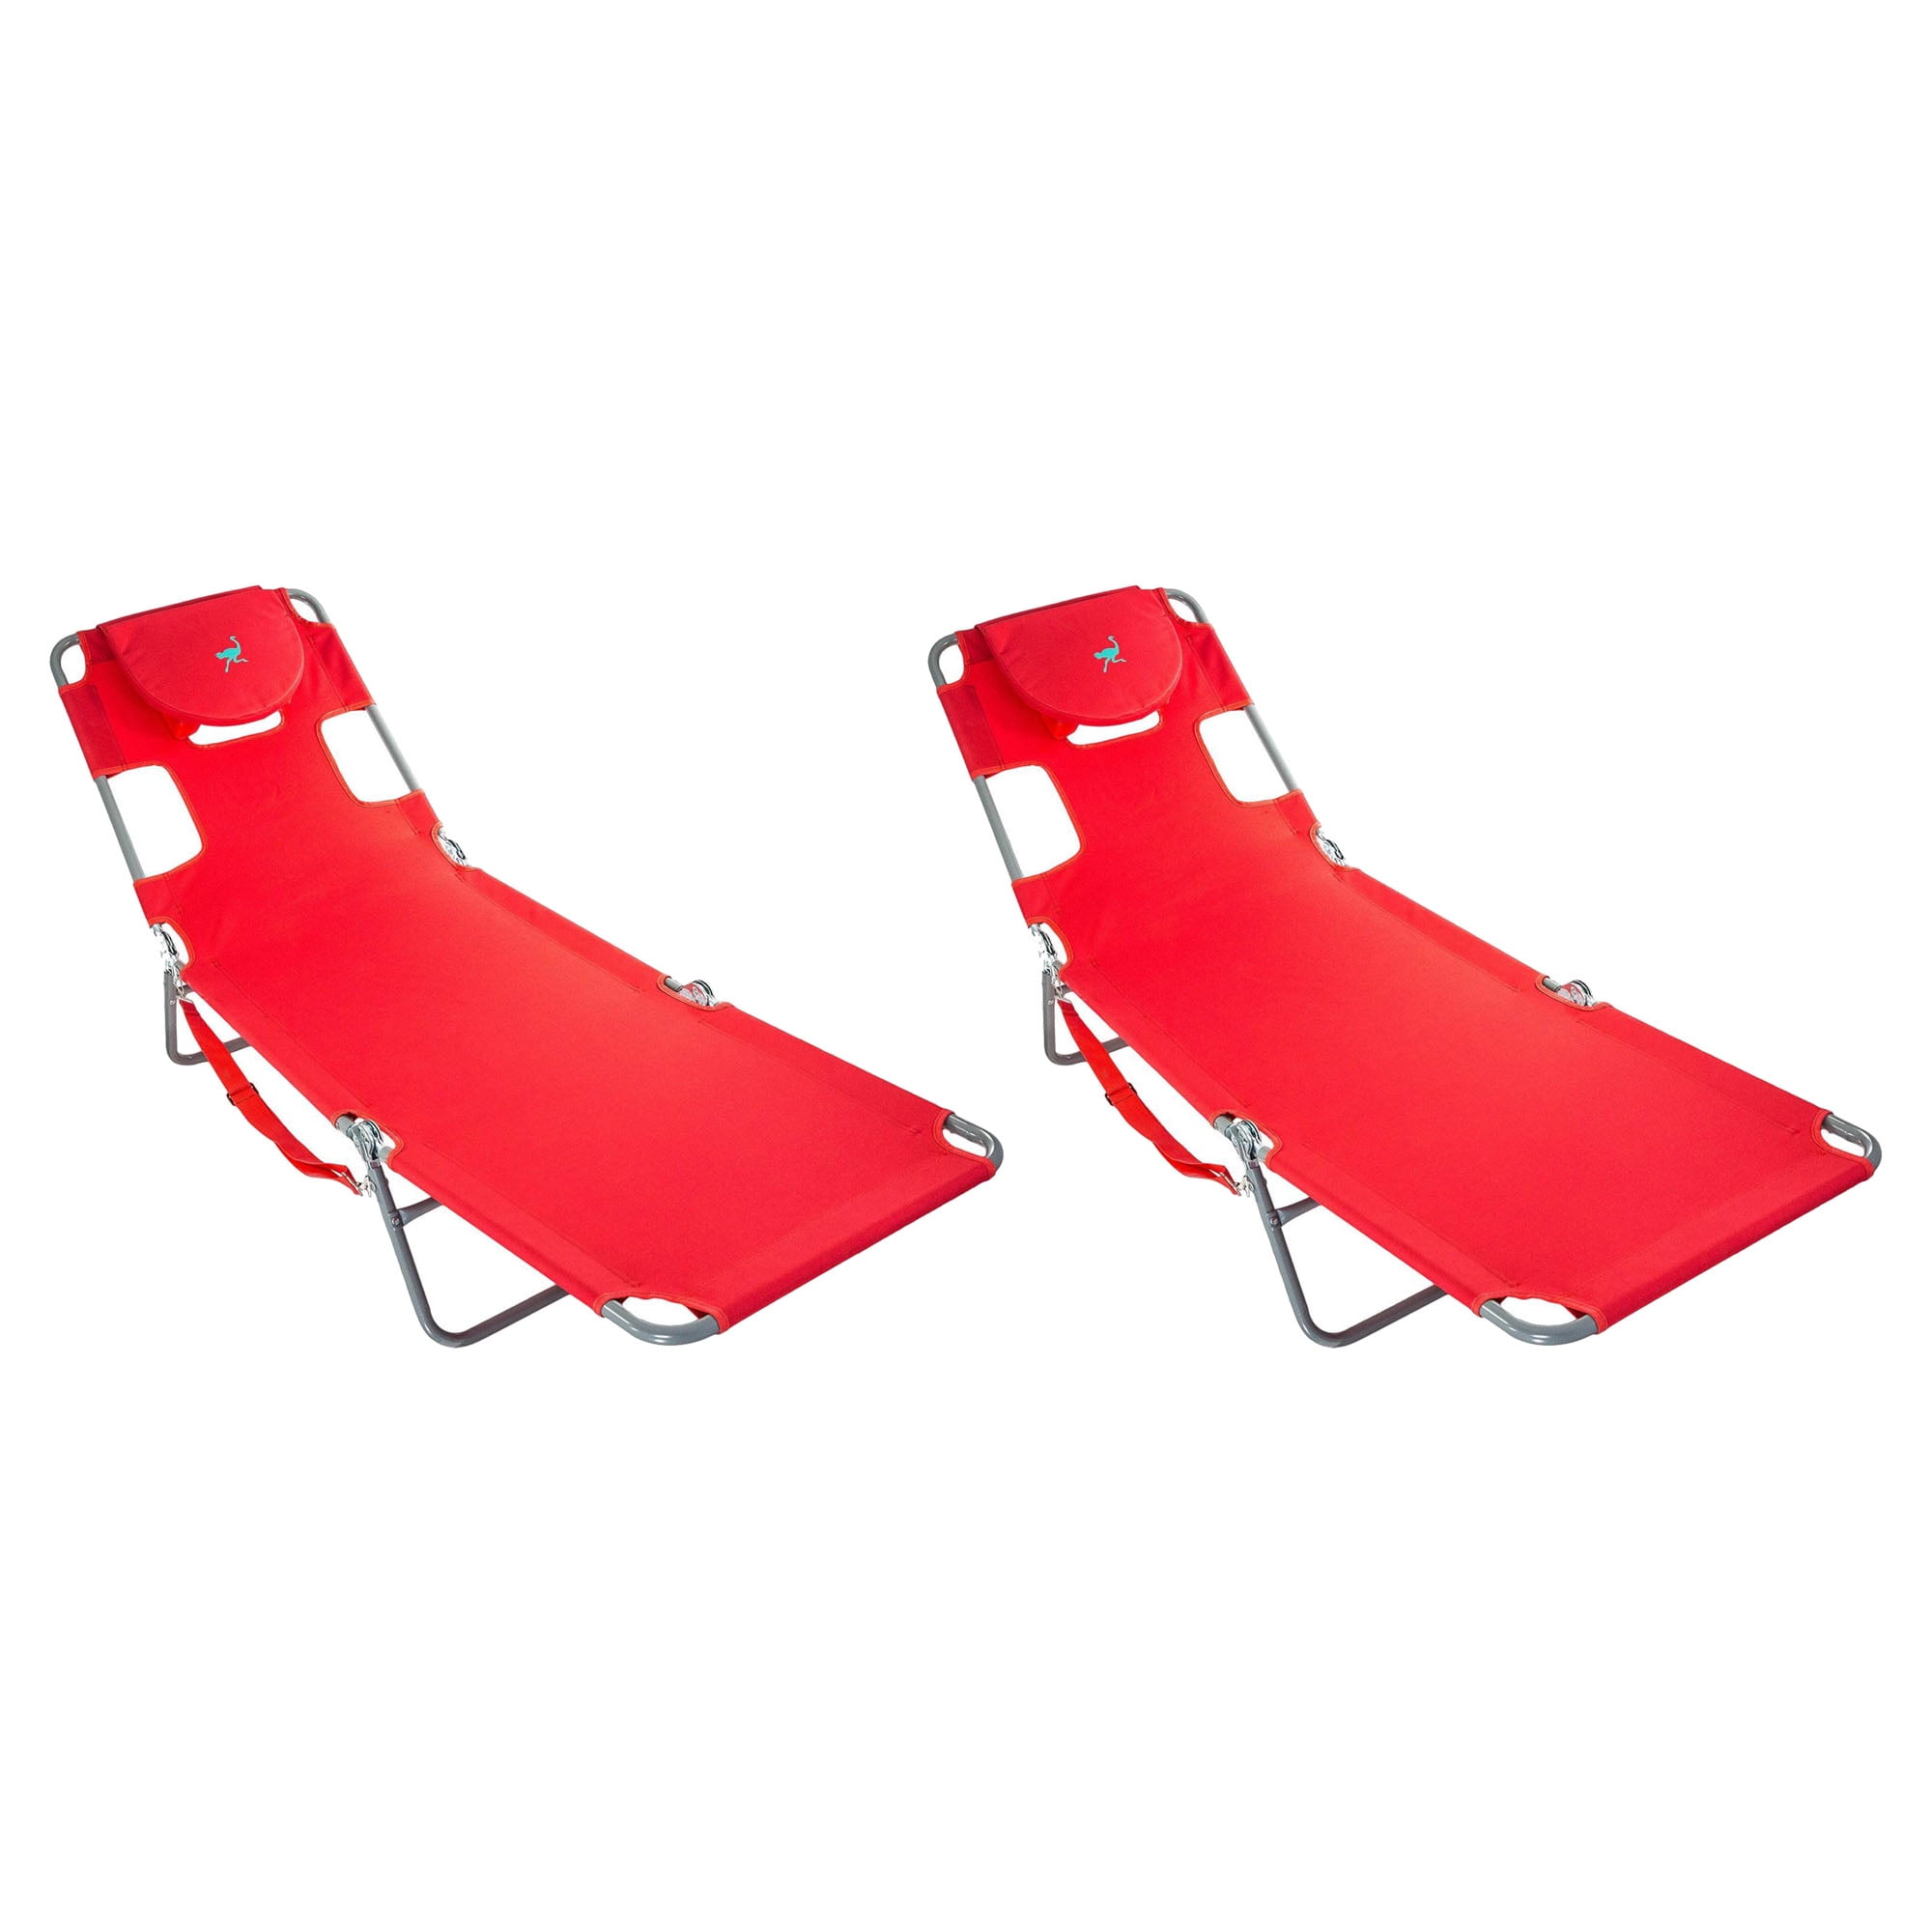 Ostrich Chaise Lounge Folding Portable Sunbathing Poolside Beach Chair Red 